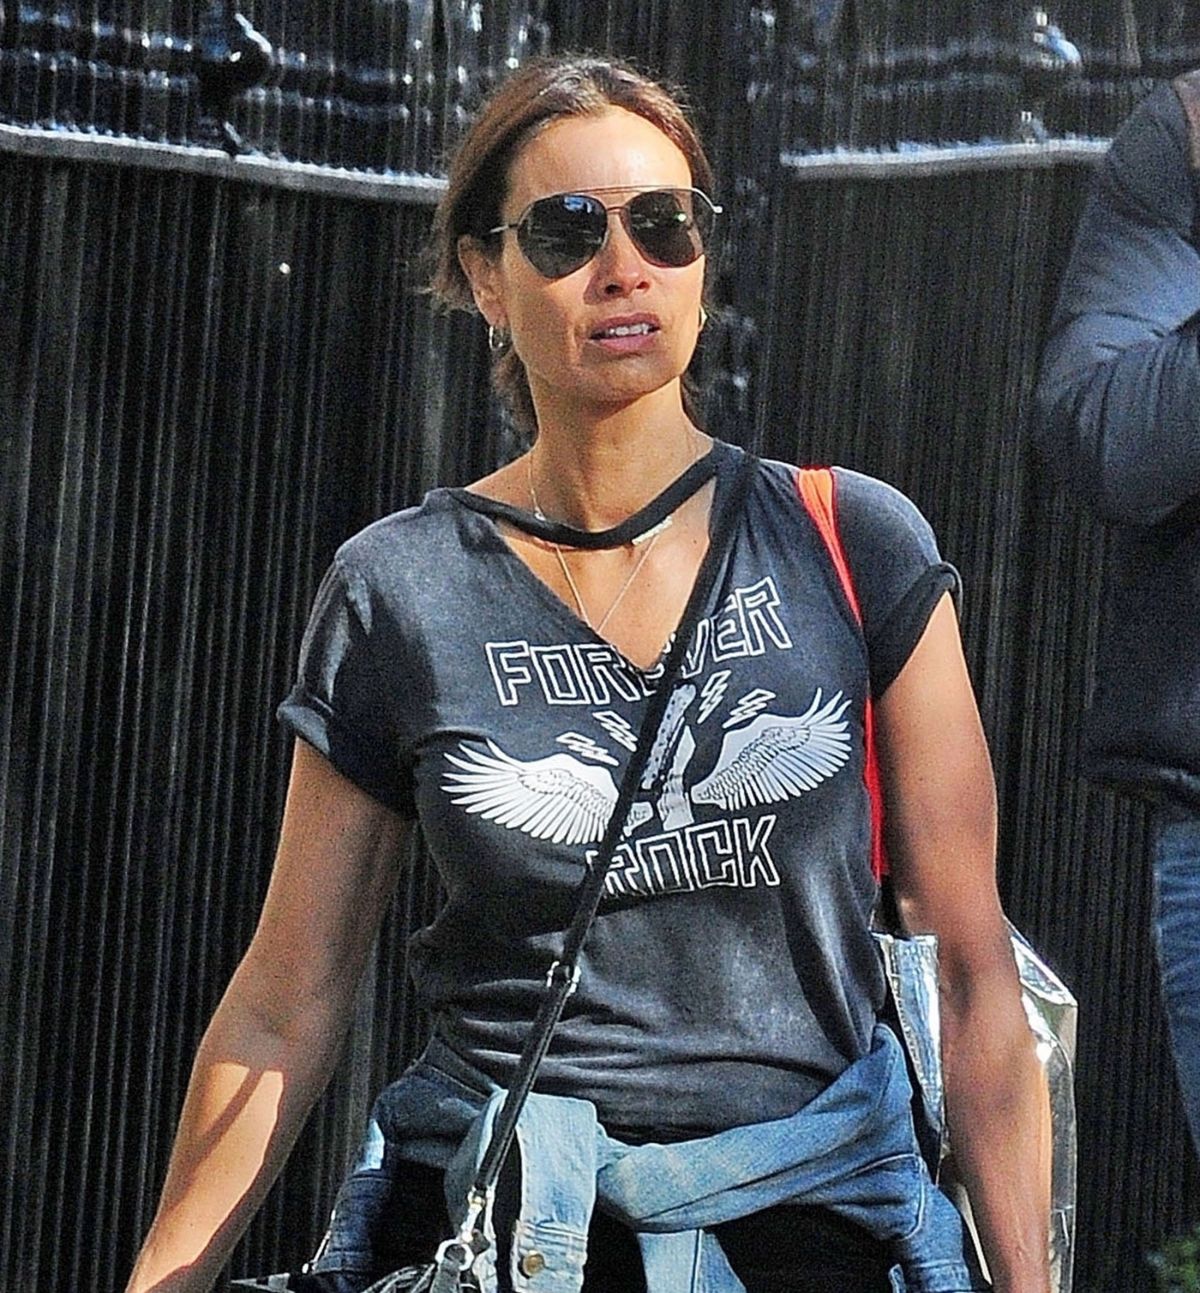 Melanie Sykes â€“ Out and about in London